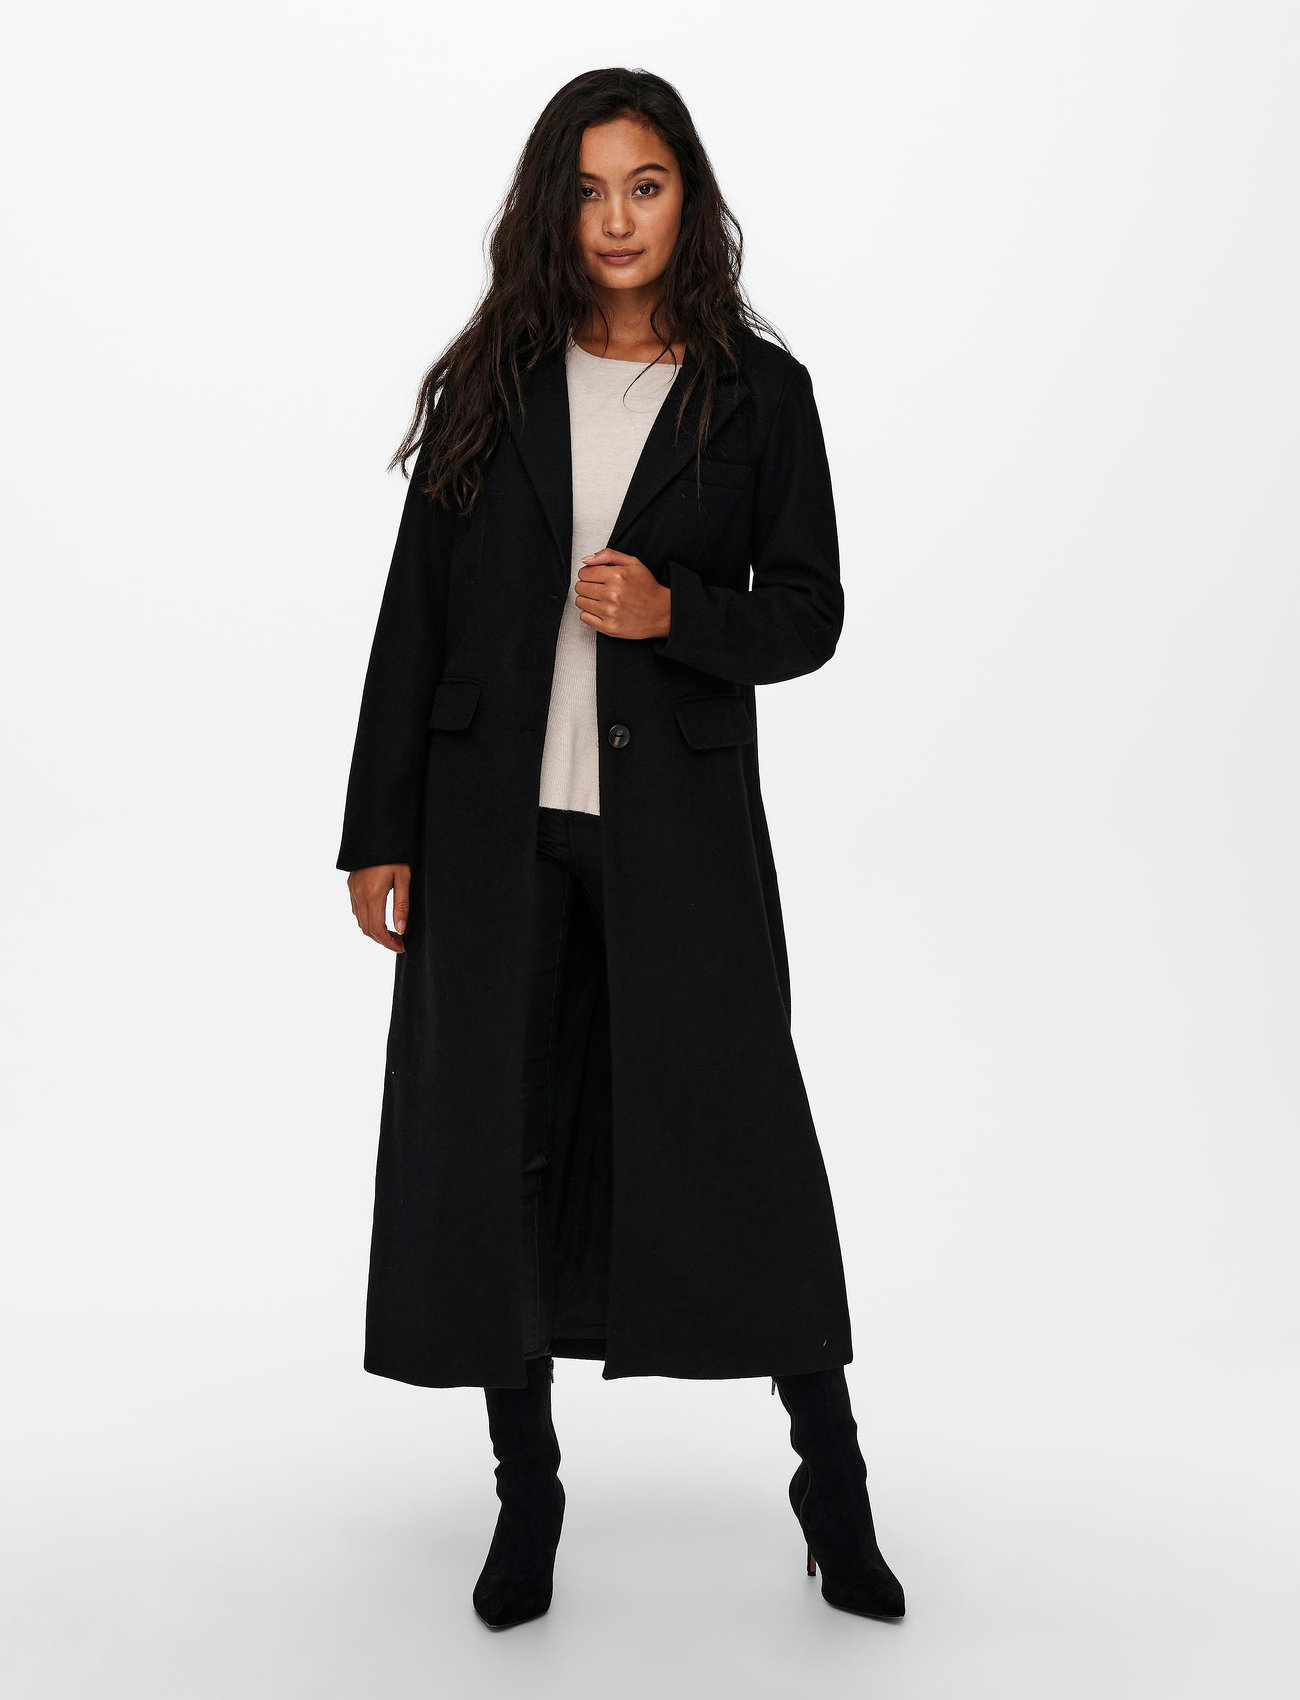 ONLY Onlemma X-long Coat Cc €. Buy 69.99 Boozt.com. delivery - Coats ONLY Winter online Fast from returns at and easy Otw